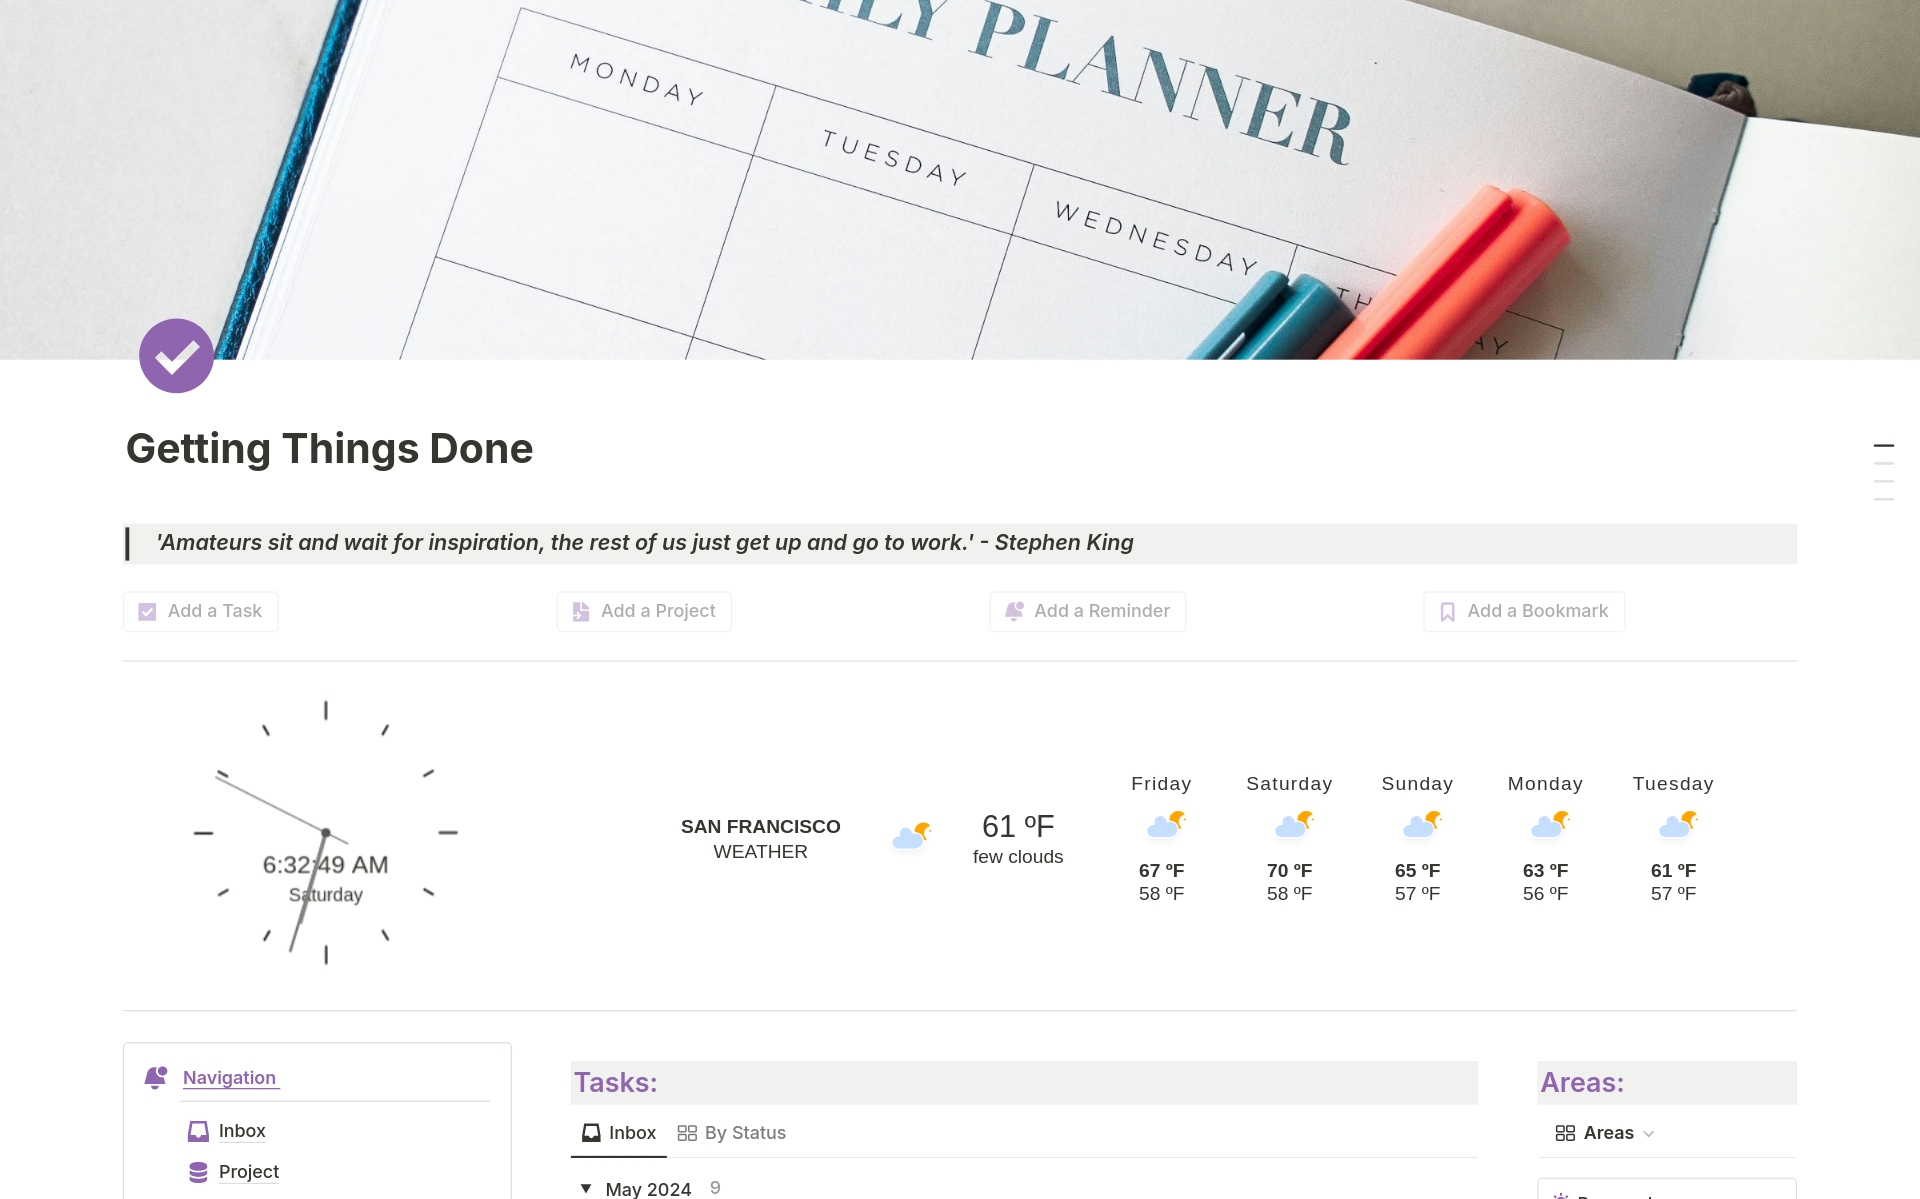 In the Get Things Done template, you can manage your tasks and projects and complete them on time. 